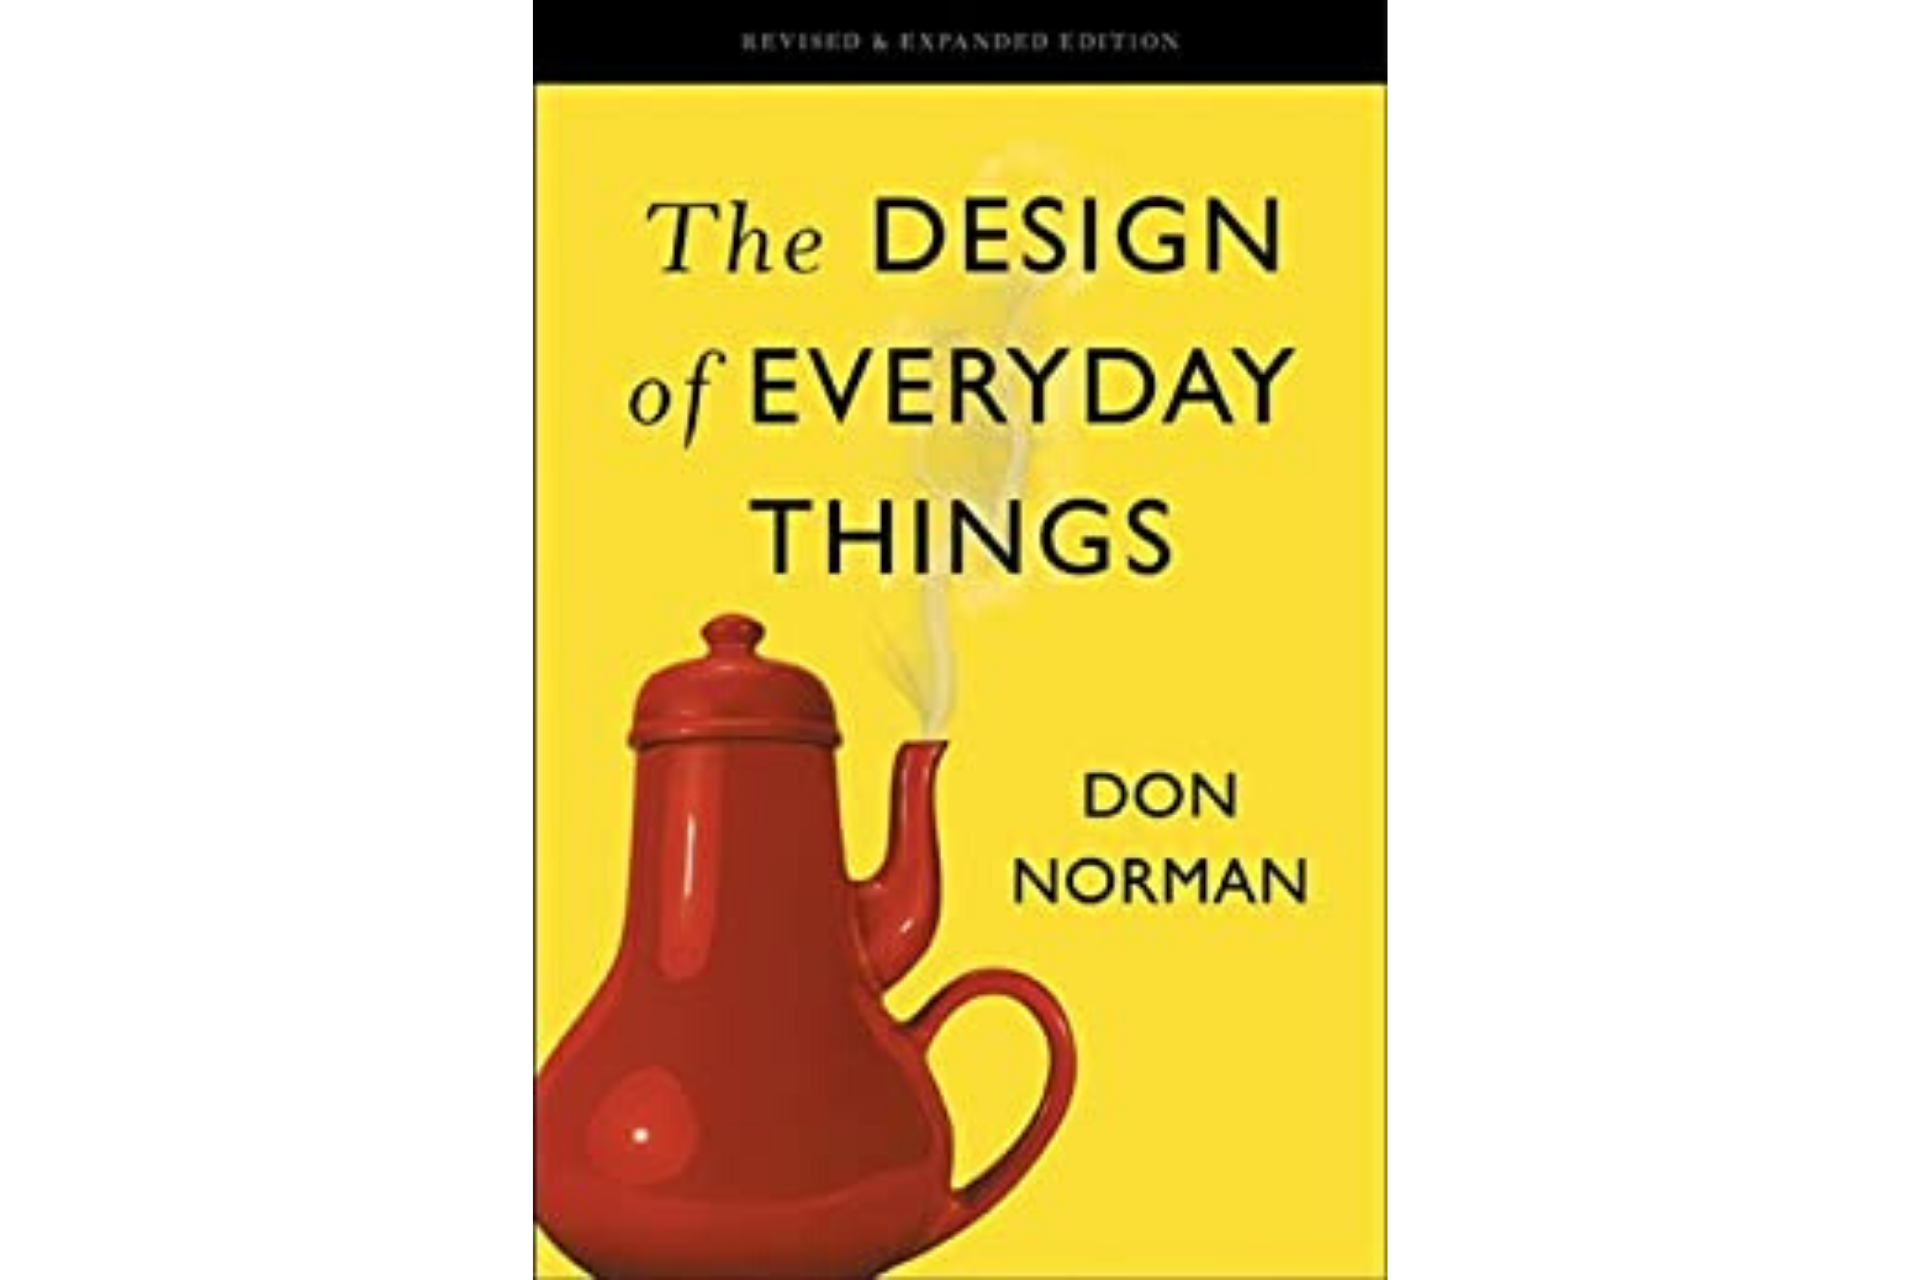 don norman the design of everyday things audiobook